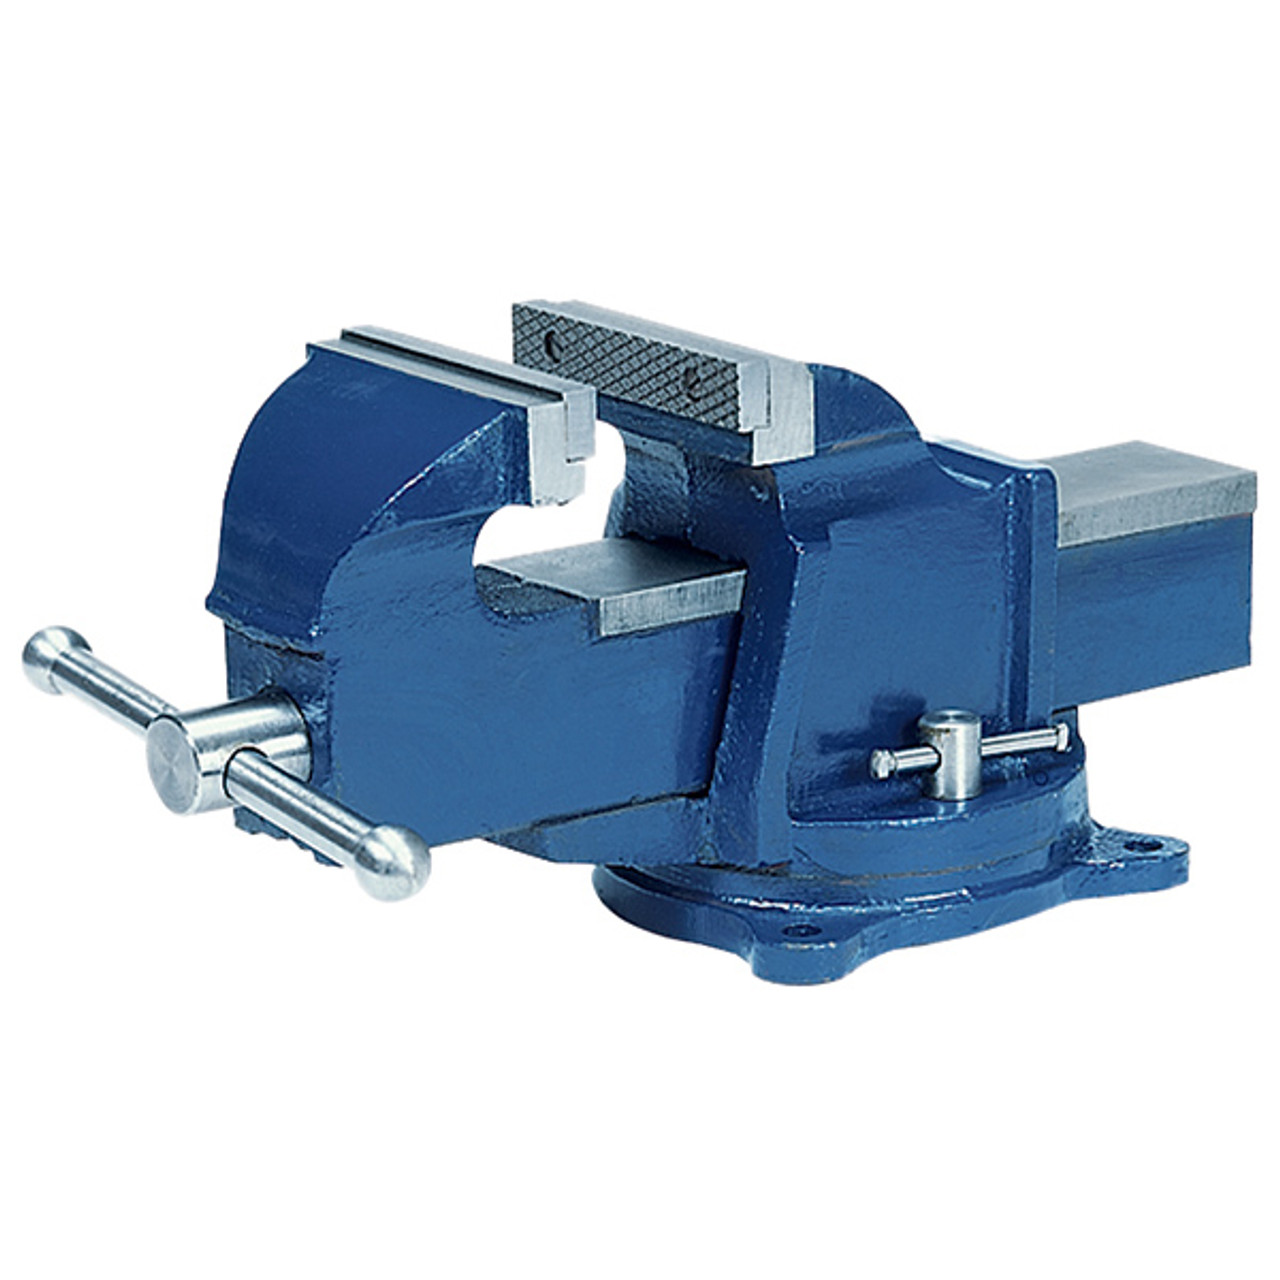 61-207-103      3" INDUSTRIAL QUALITYSWIVEL BASE BENCH VISE